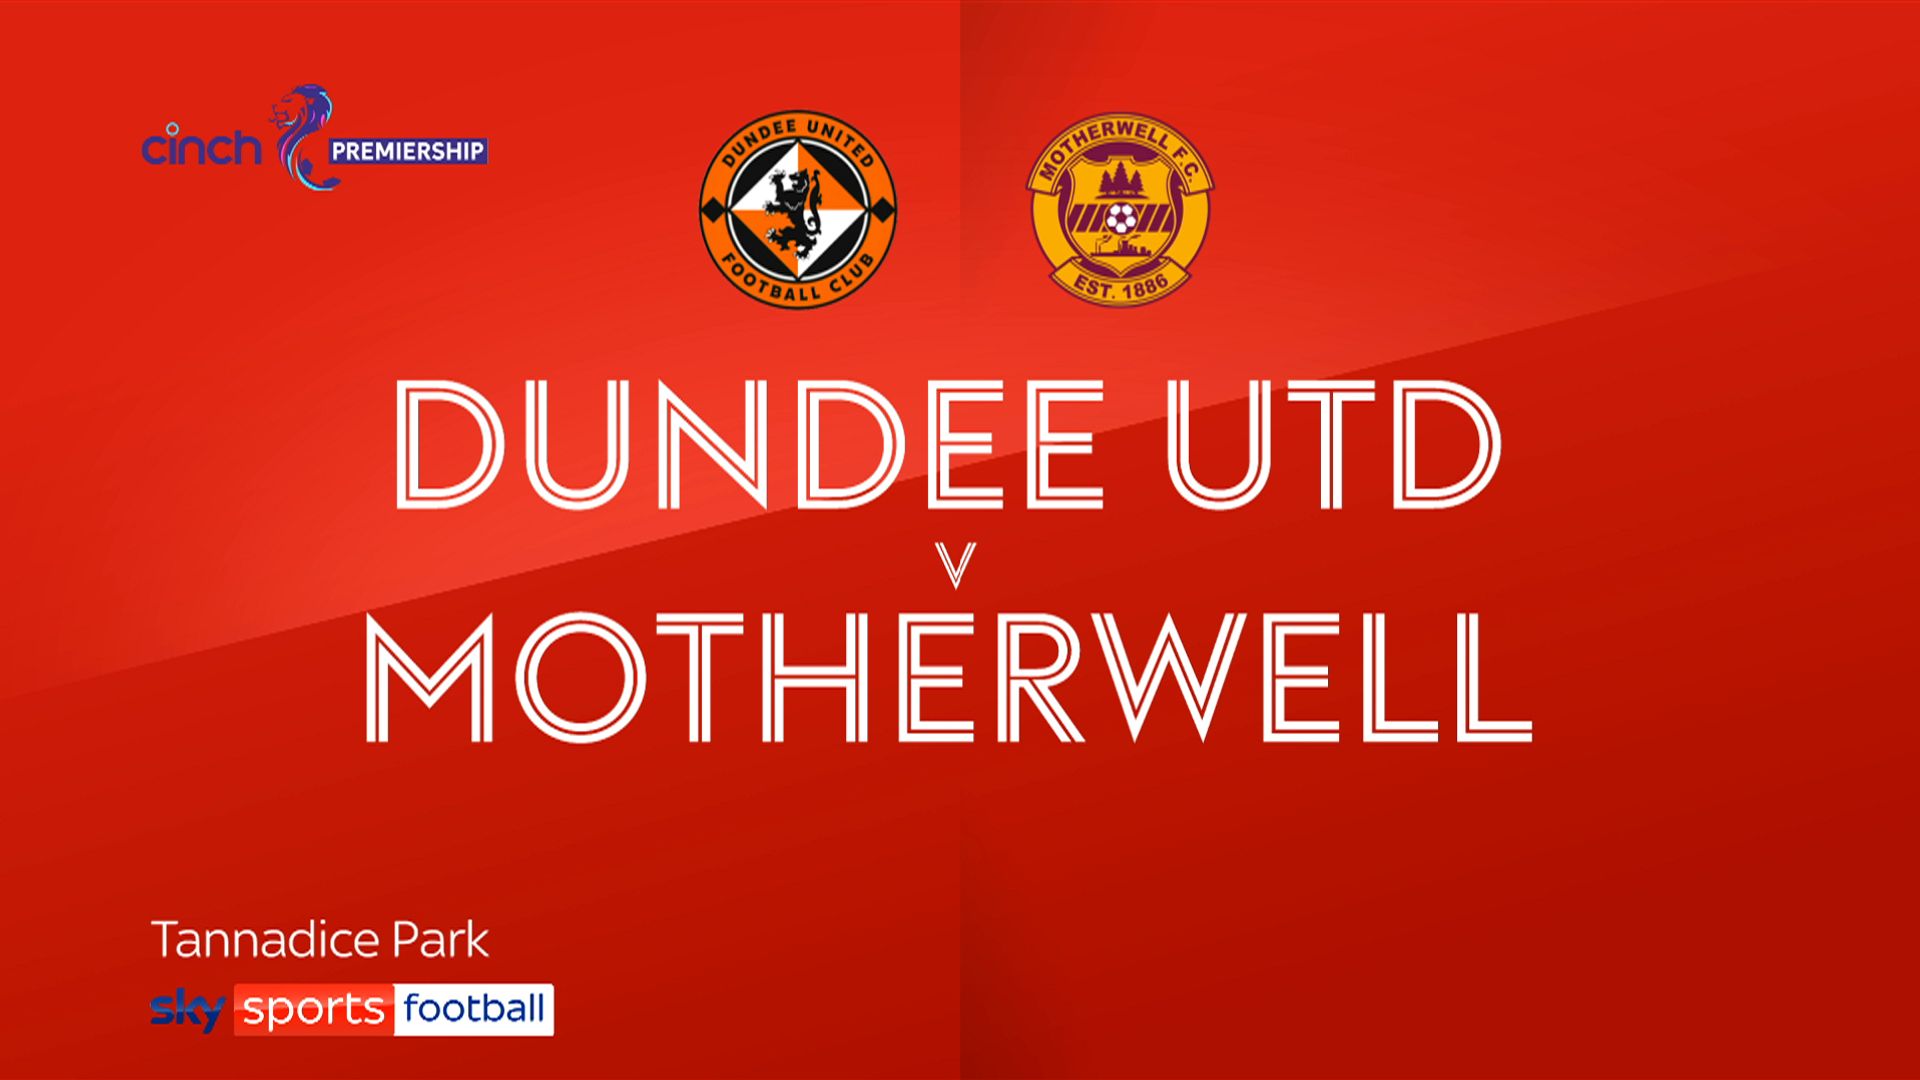 Dundee United 0-1 Motherwell